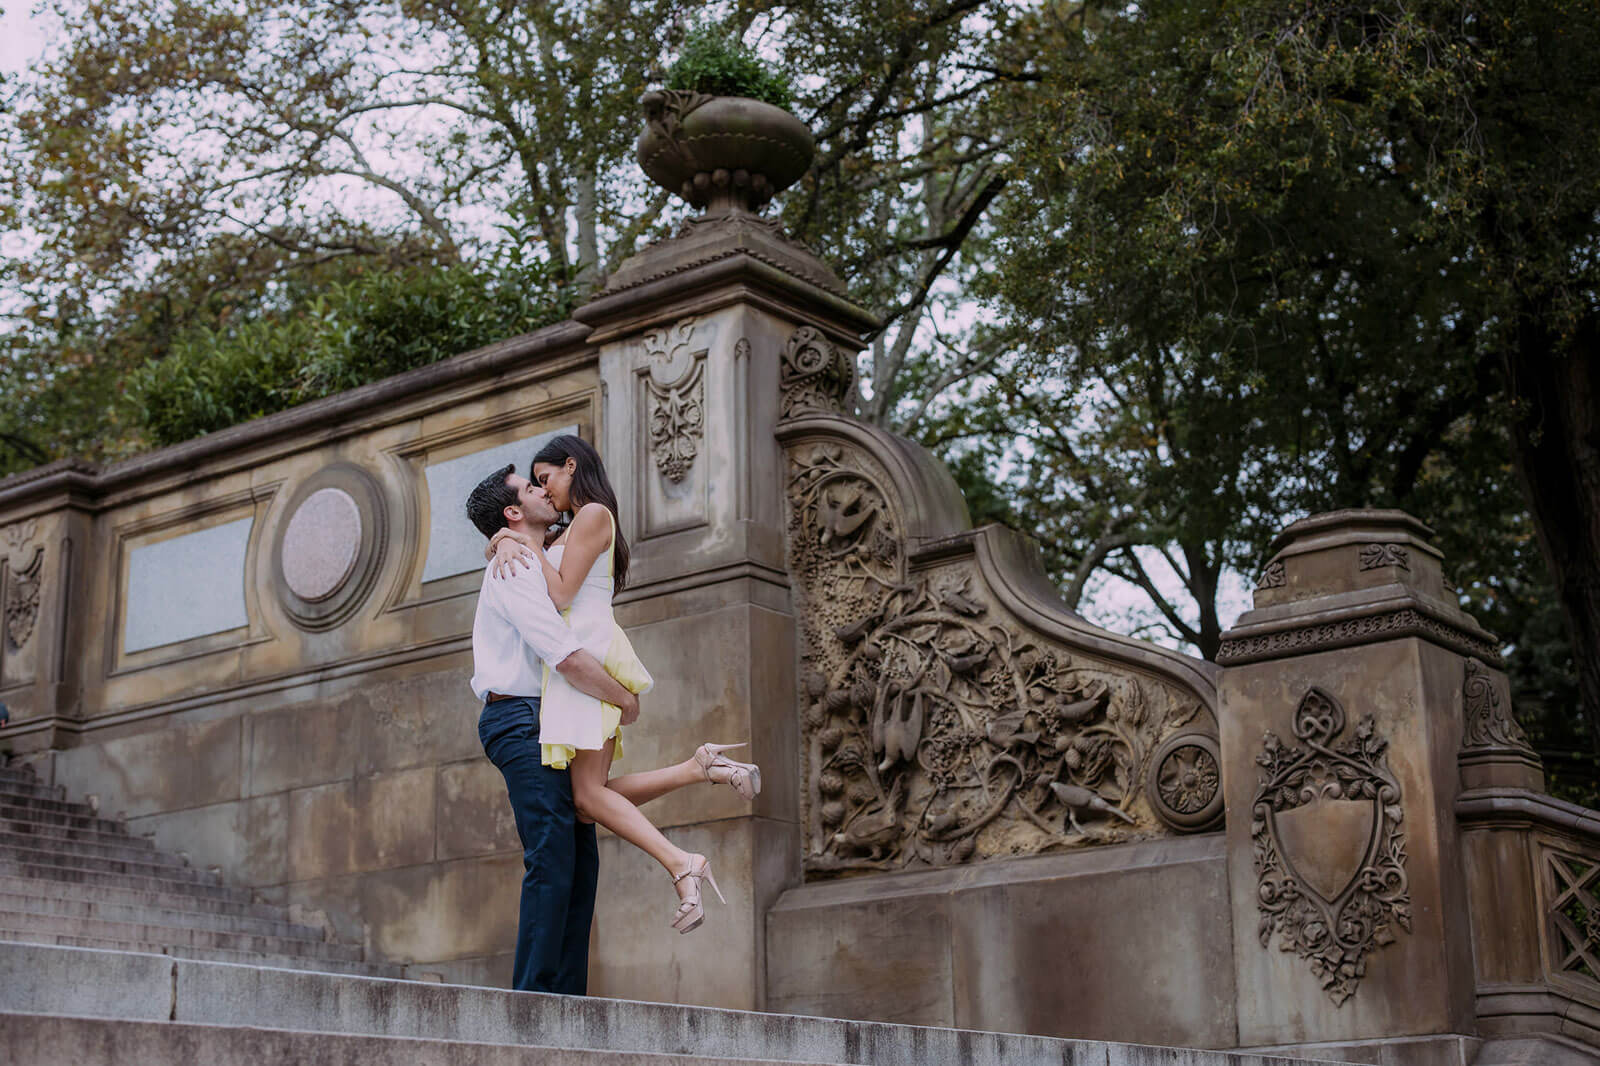 An engaged couple are kissing while the man is carrying the woman, at Central Park, NYC.